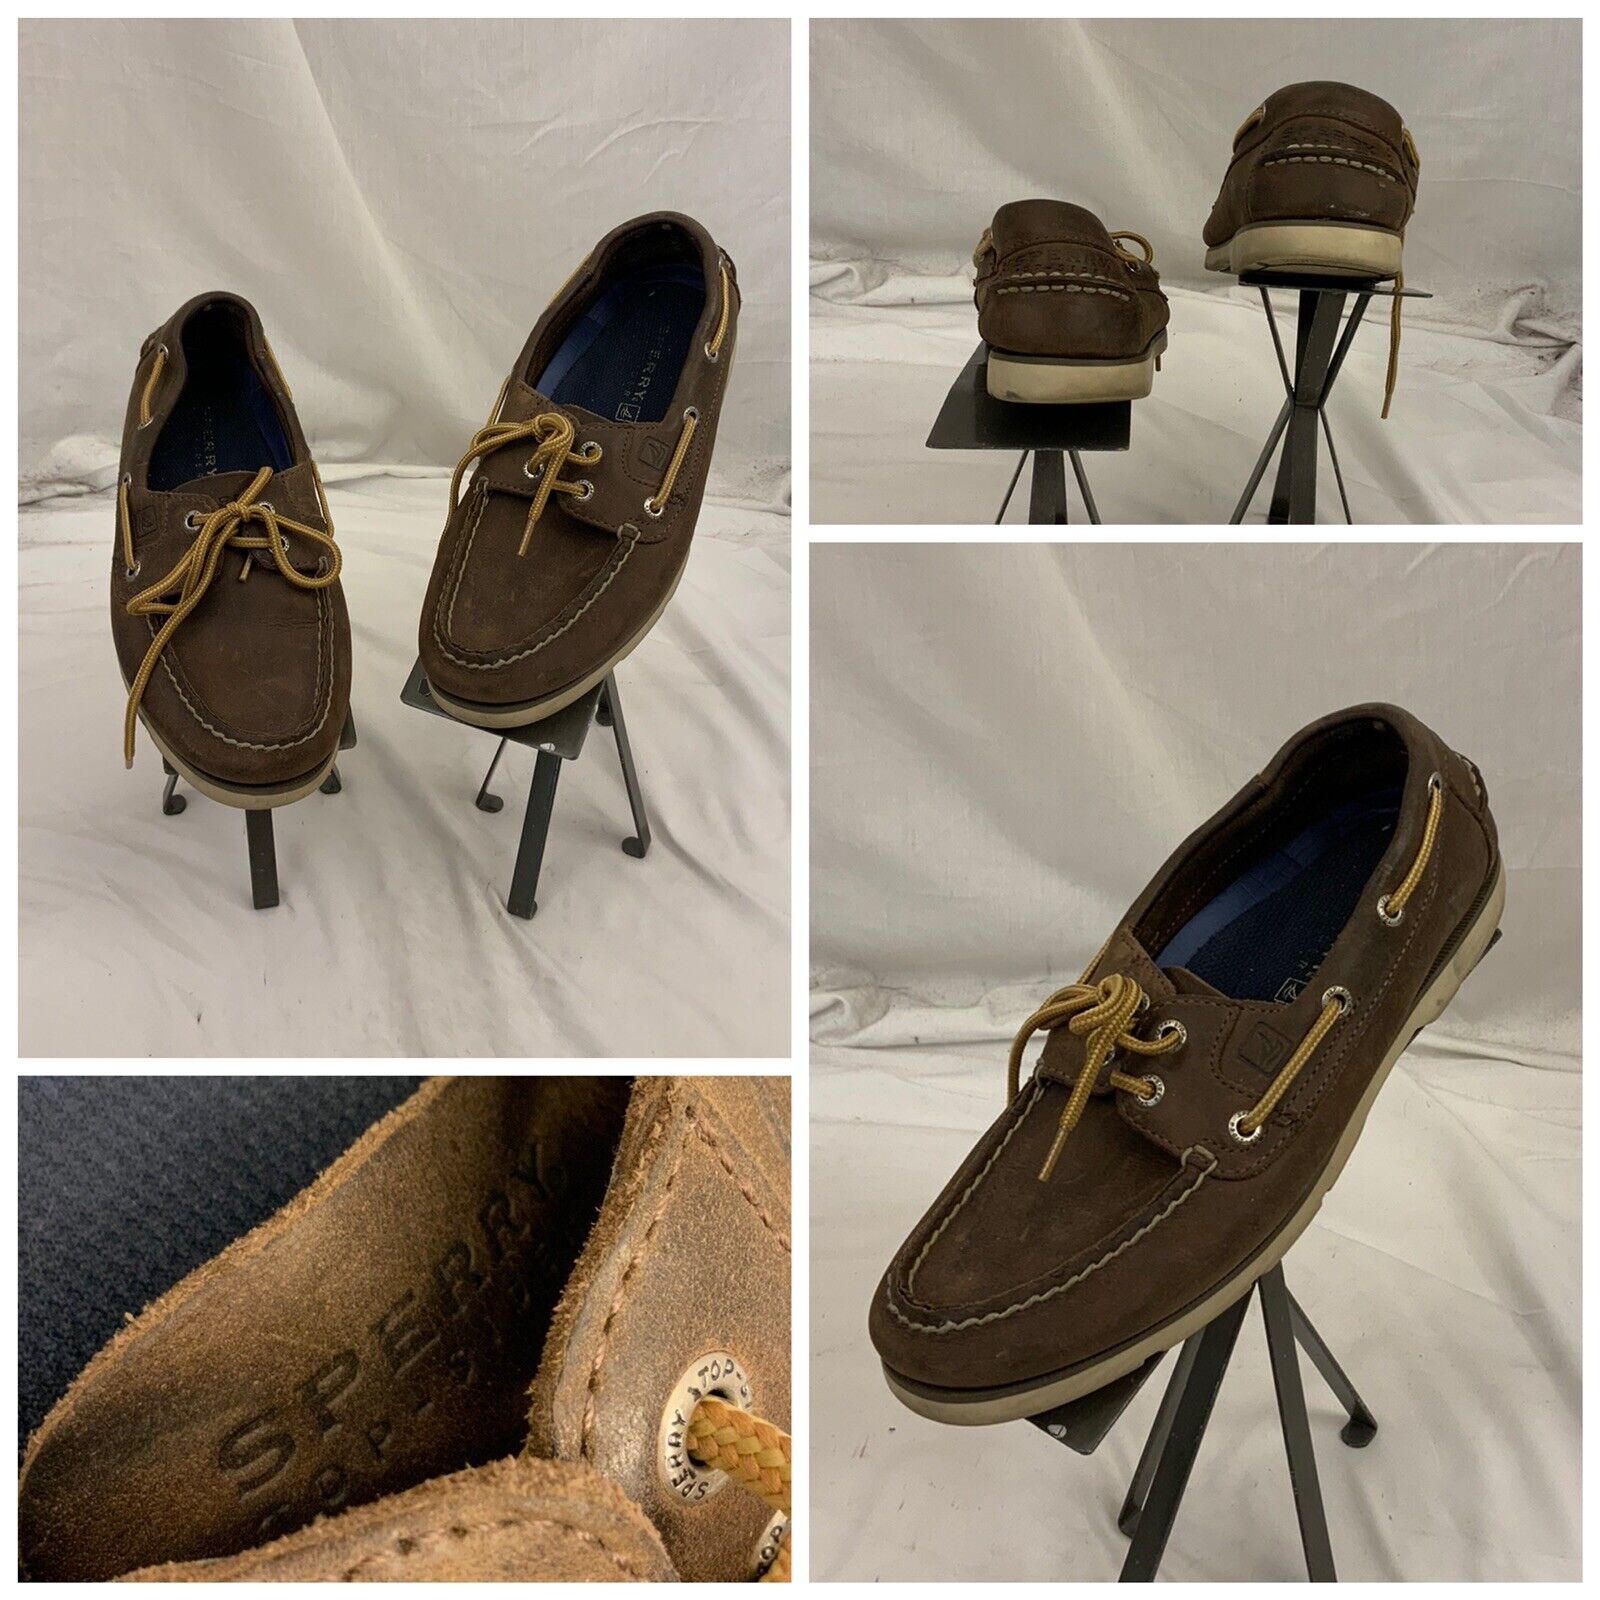 Sperry Boat Don't miss the campaign Shoes Choice 7 M Brown YGI Laced Leather Mens U1-S5